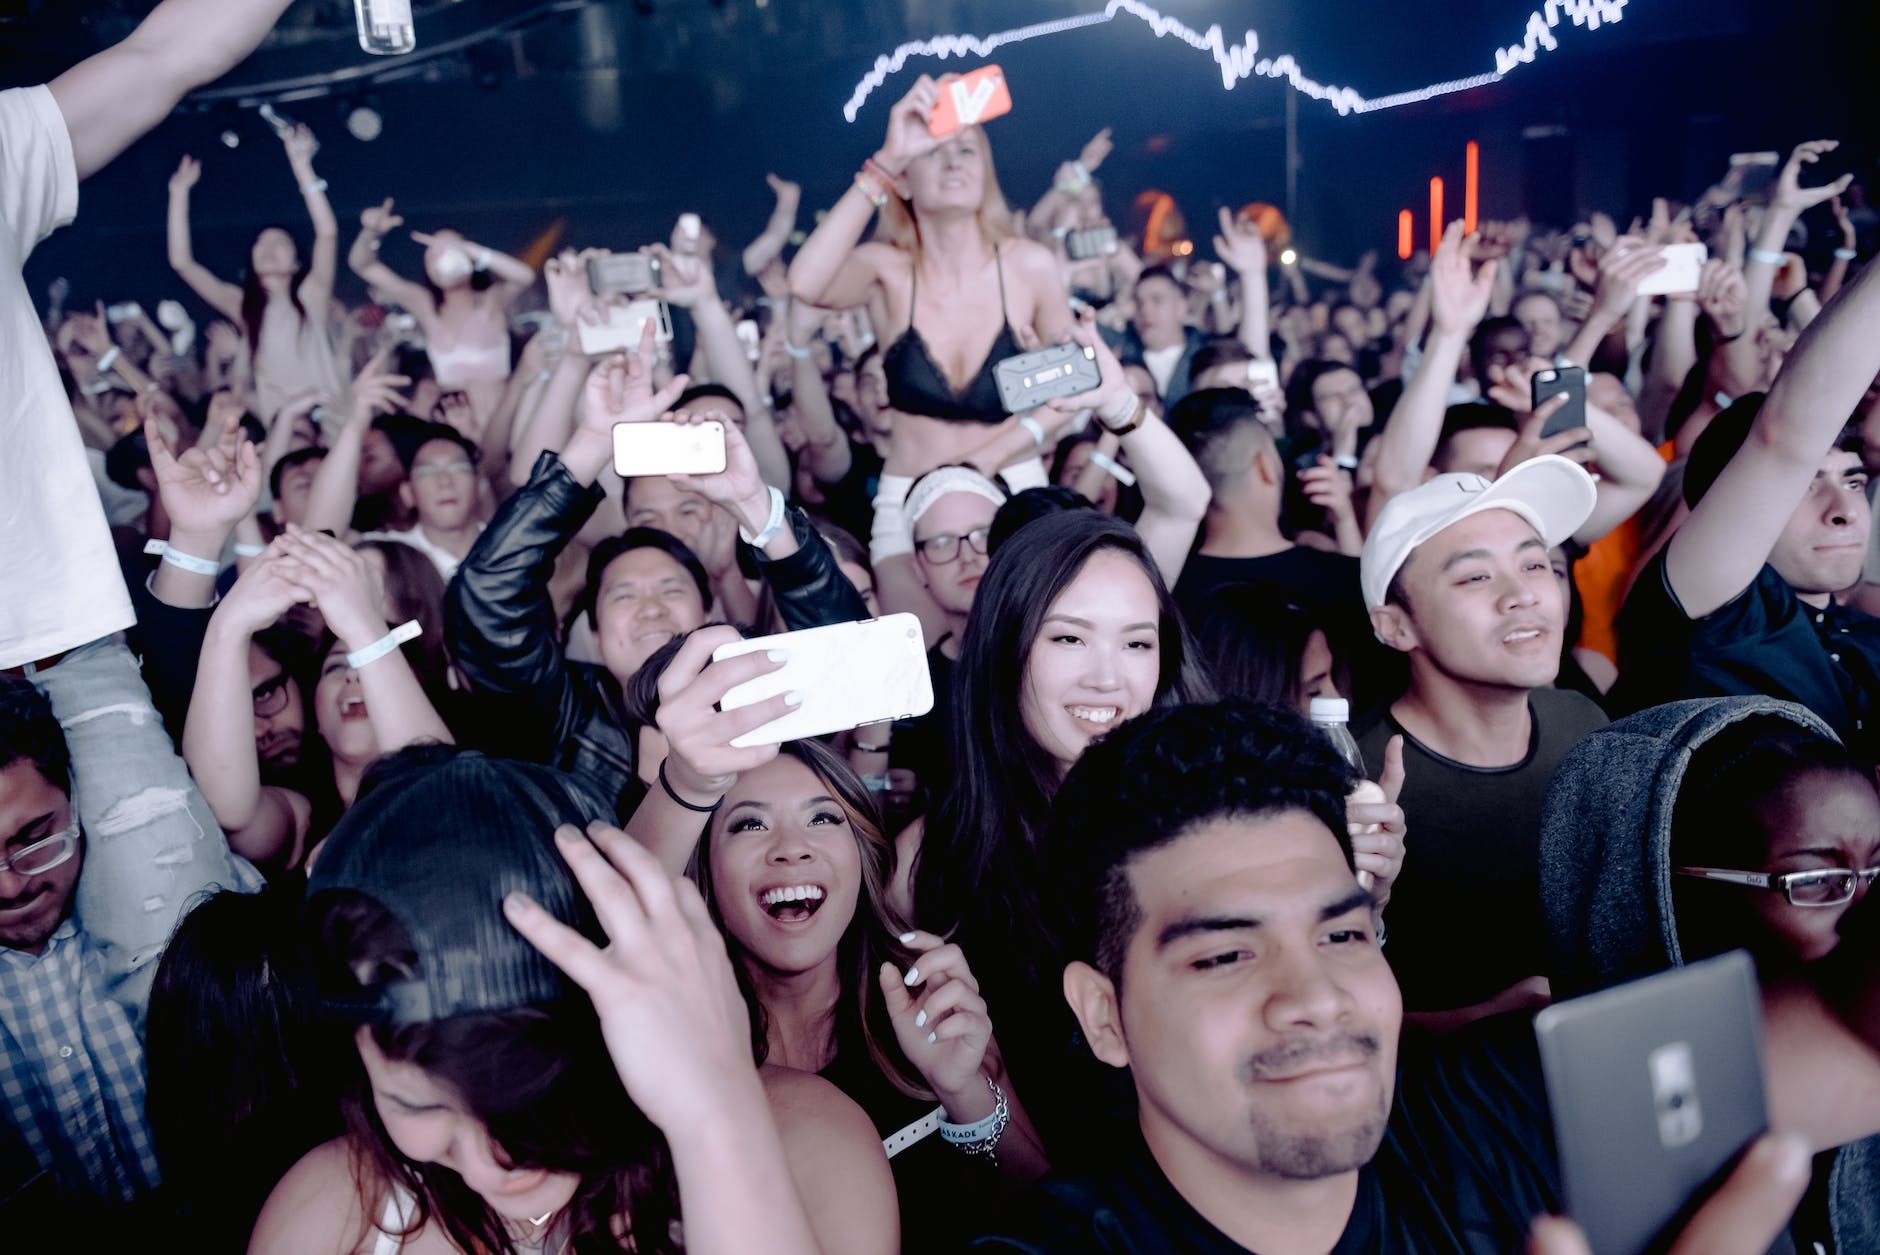 Concert-goers watching the perforamce through a smarphone